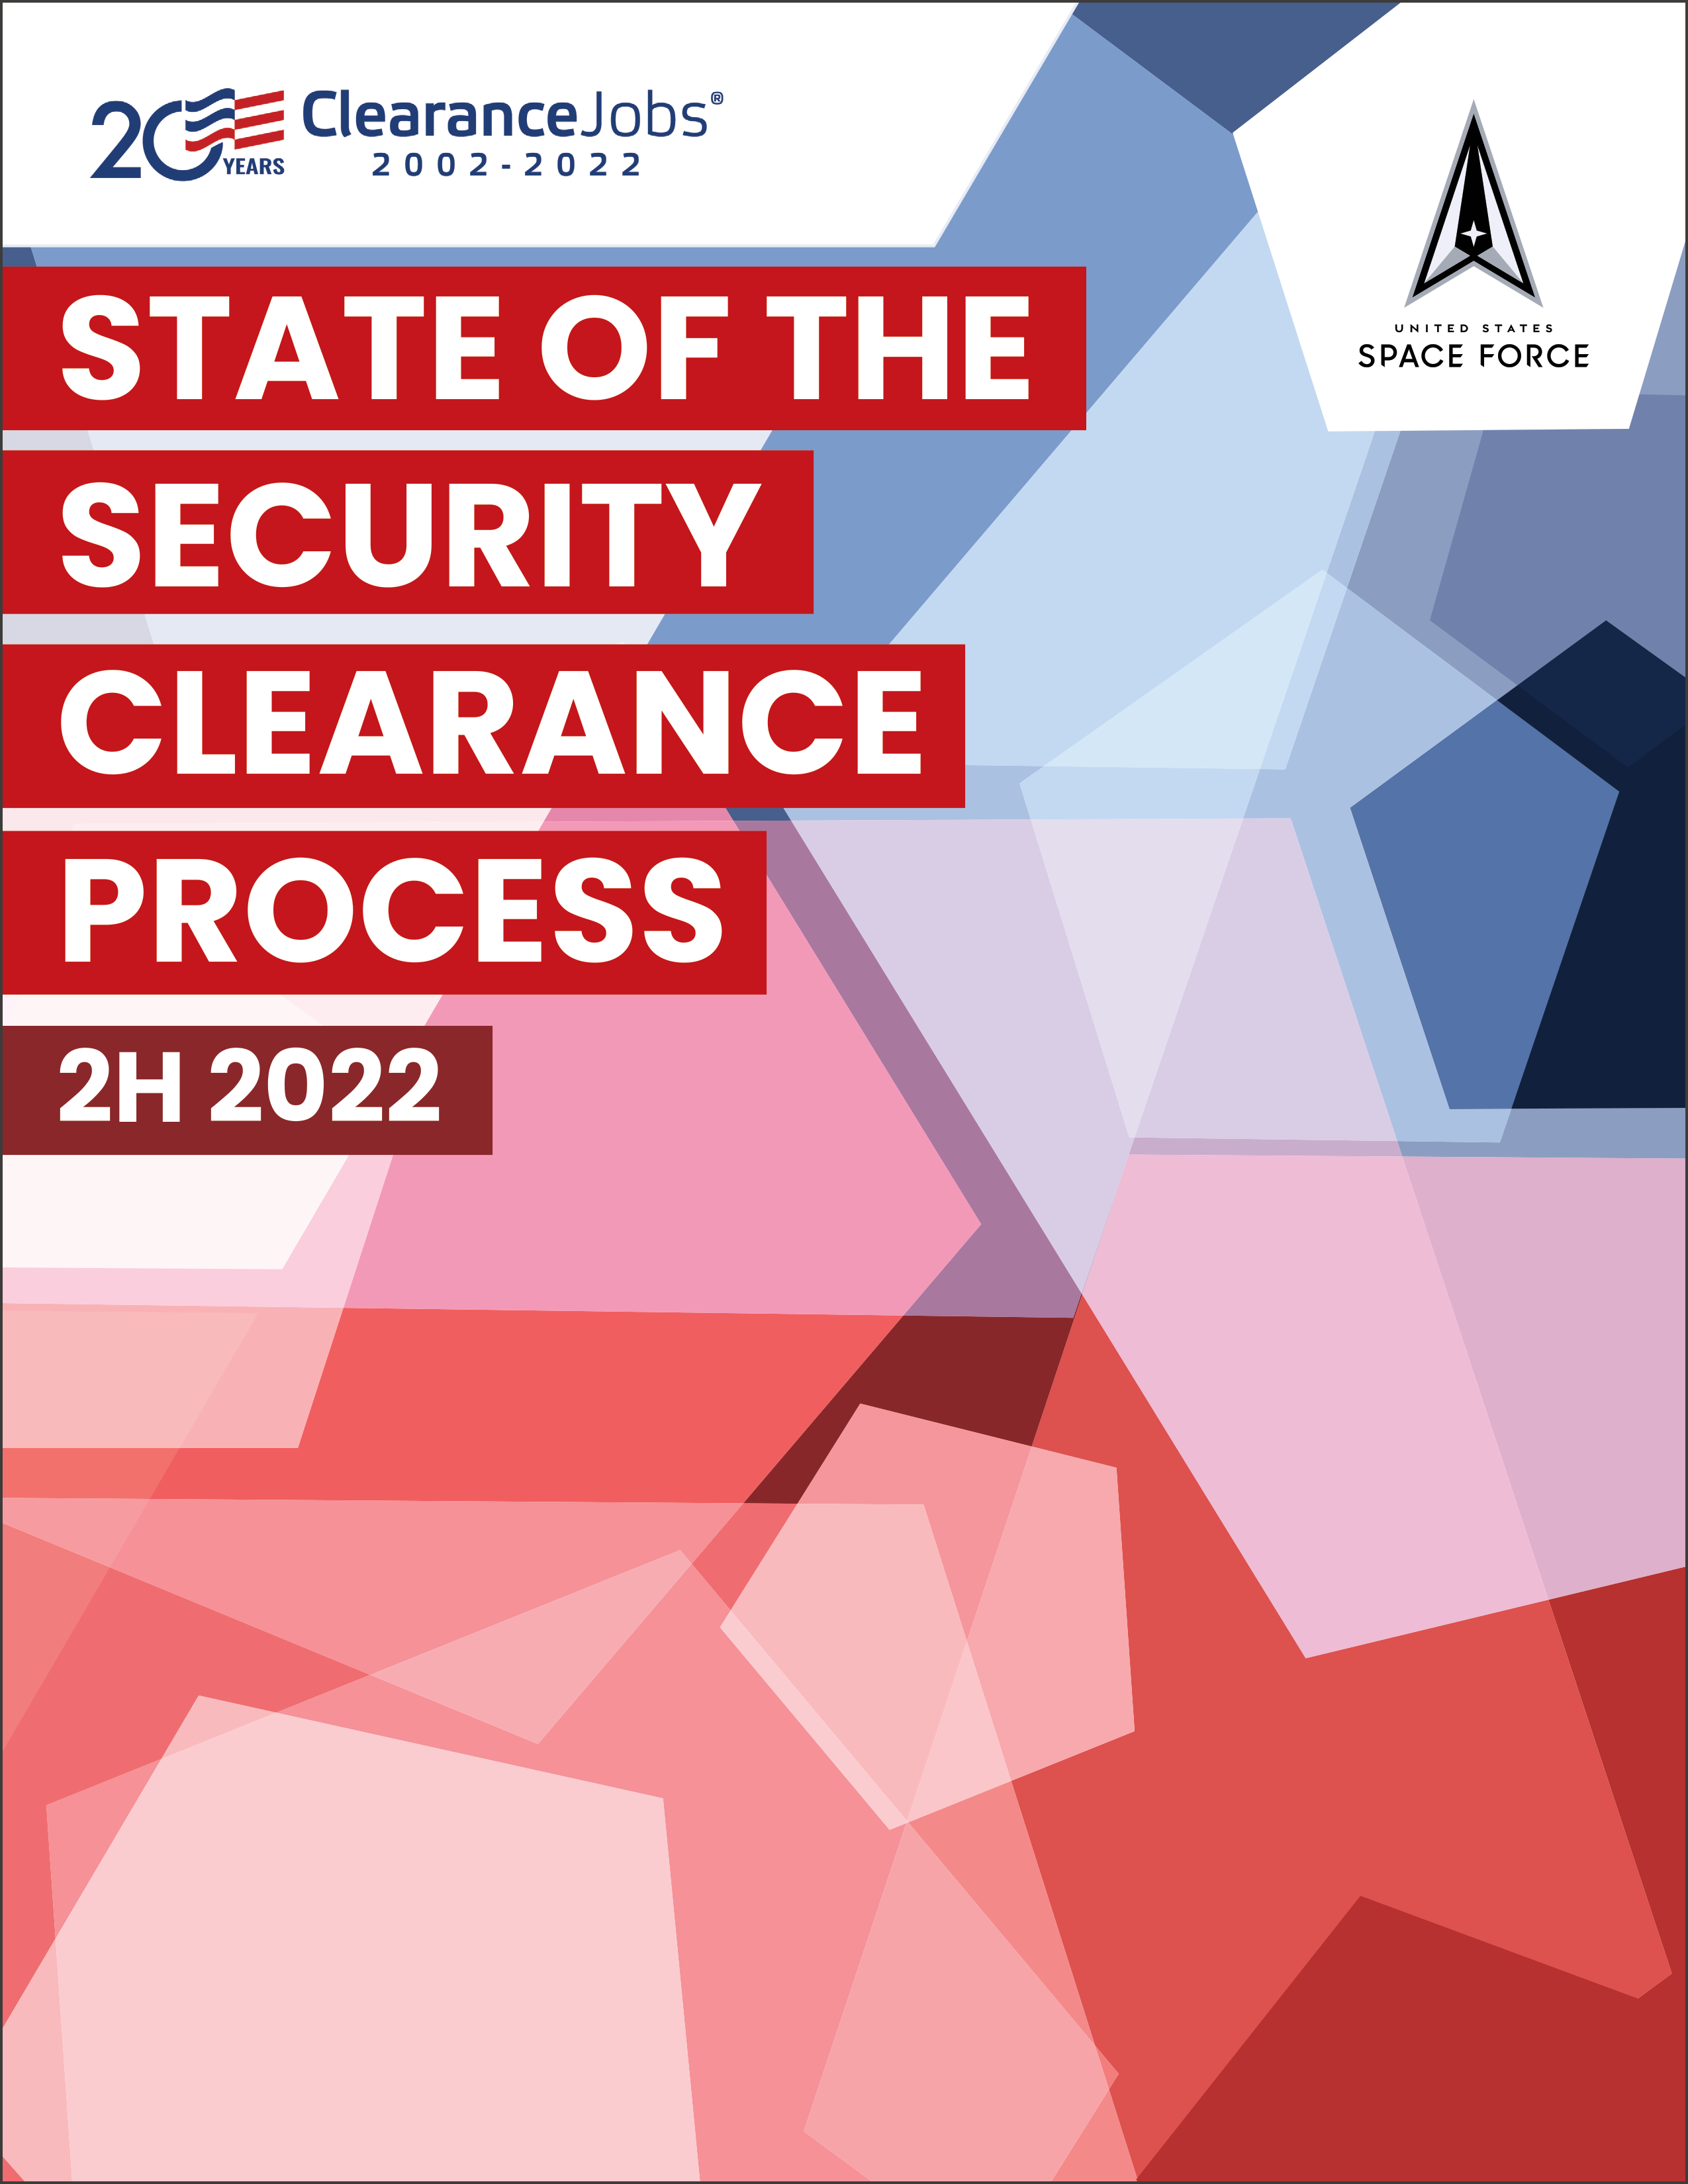 StateOfTheSecurityClearanceProcess_2H2022